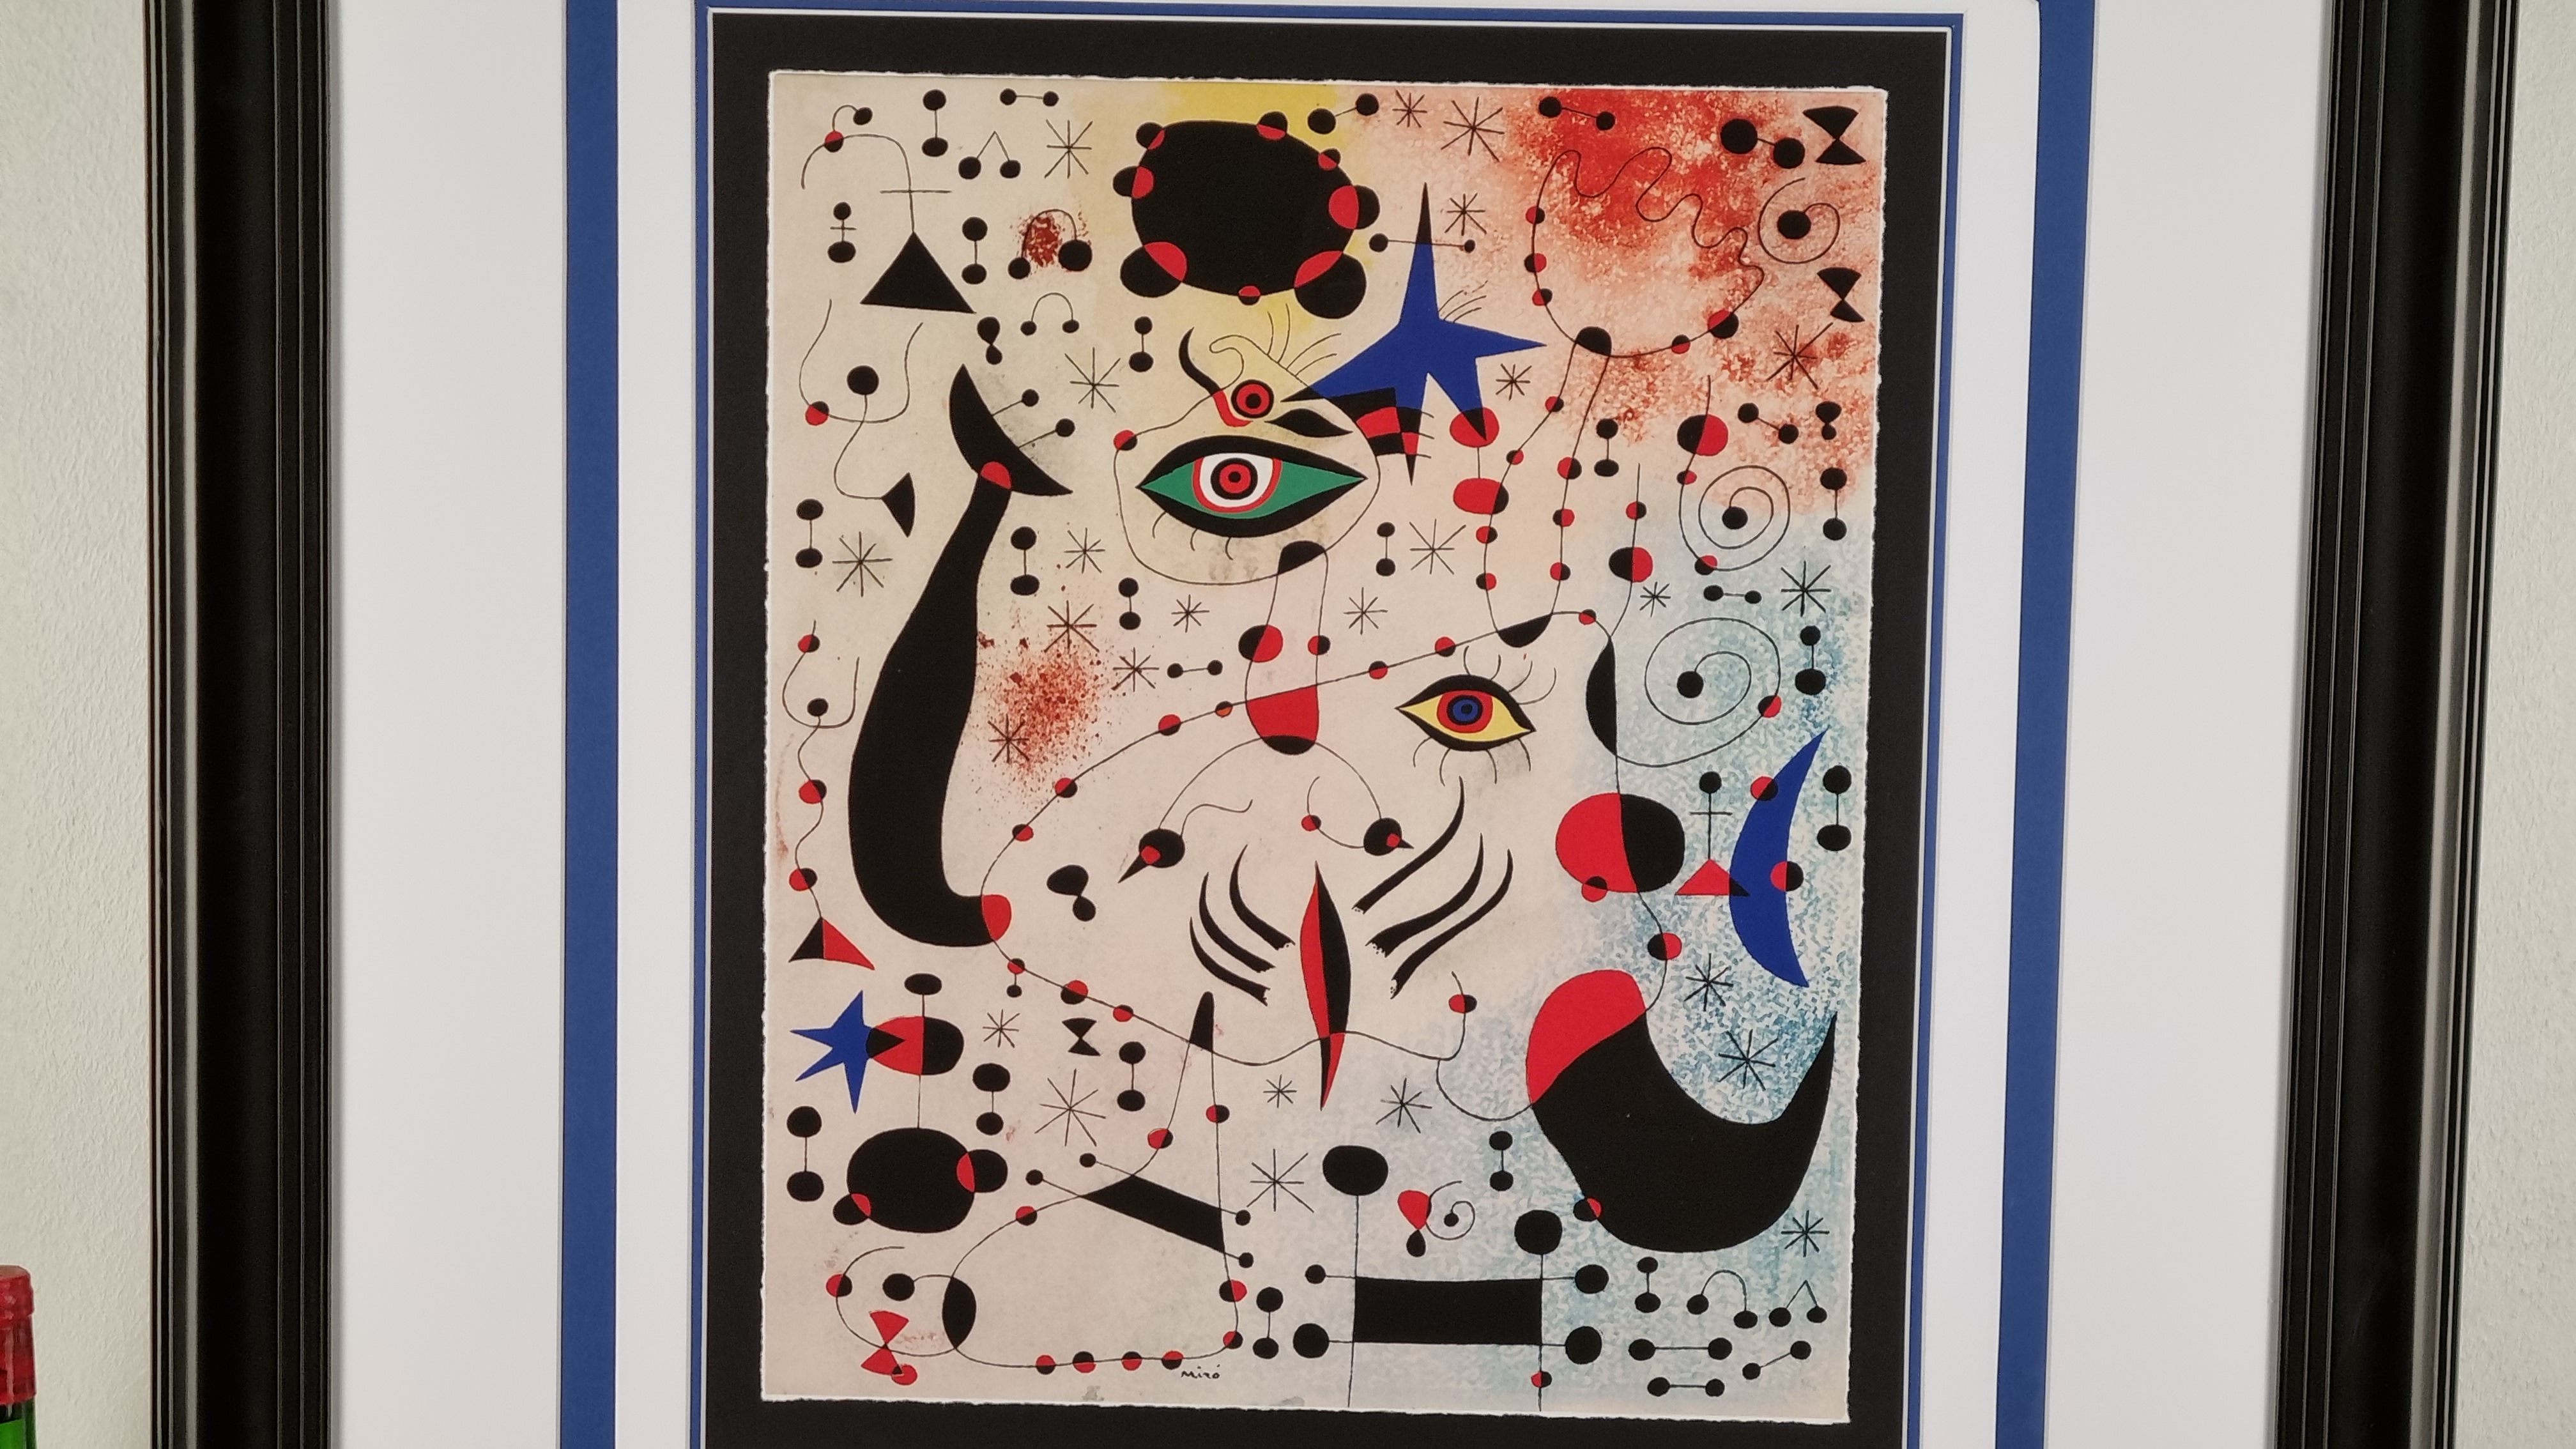 Limited Edition Joan Miro "Constellations: Ciphers and Constellations In Love With A Woman" - Image 4 of 8